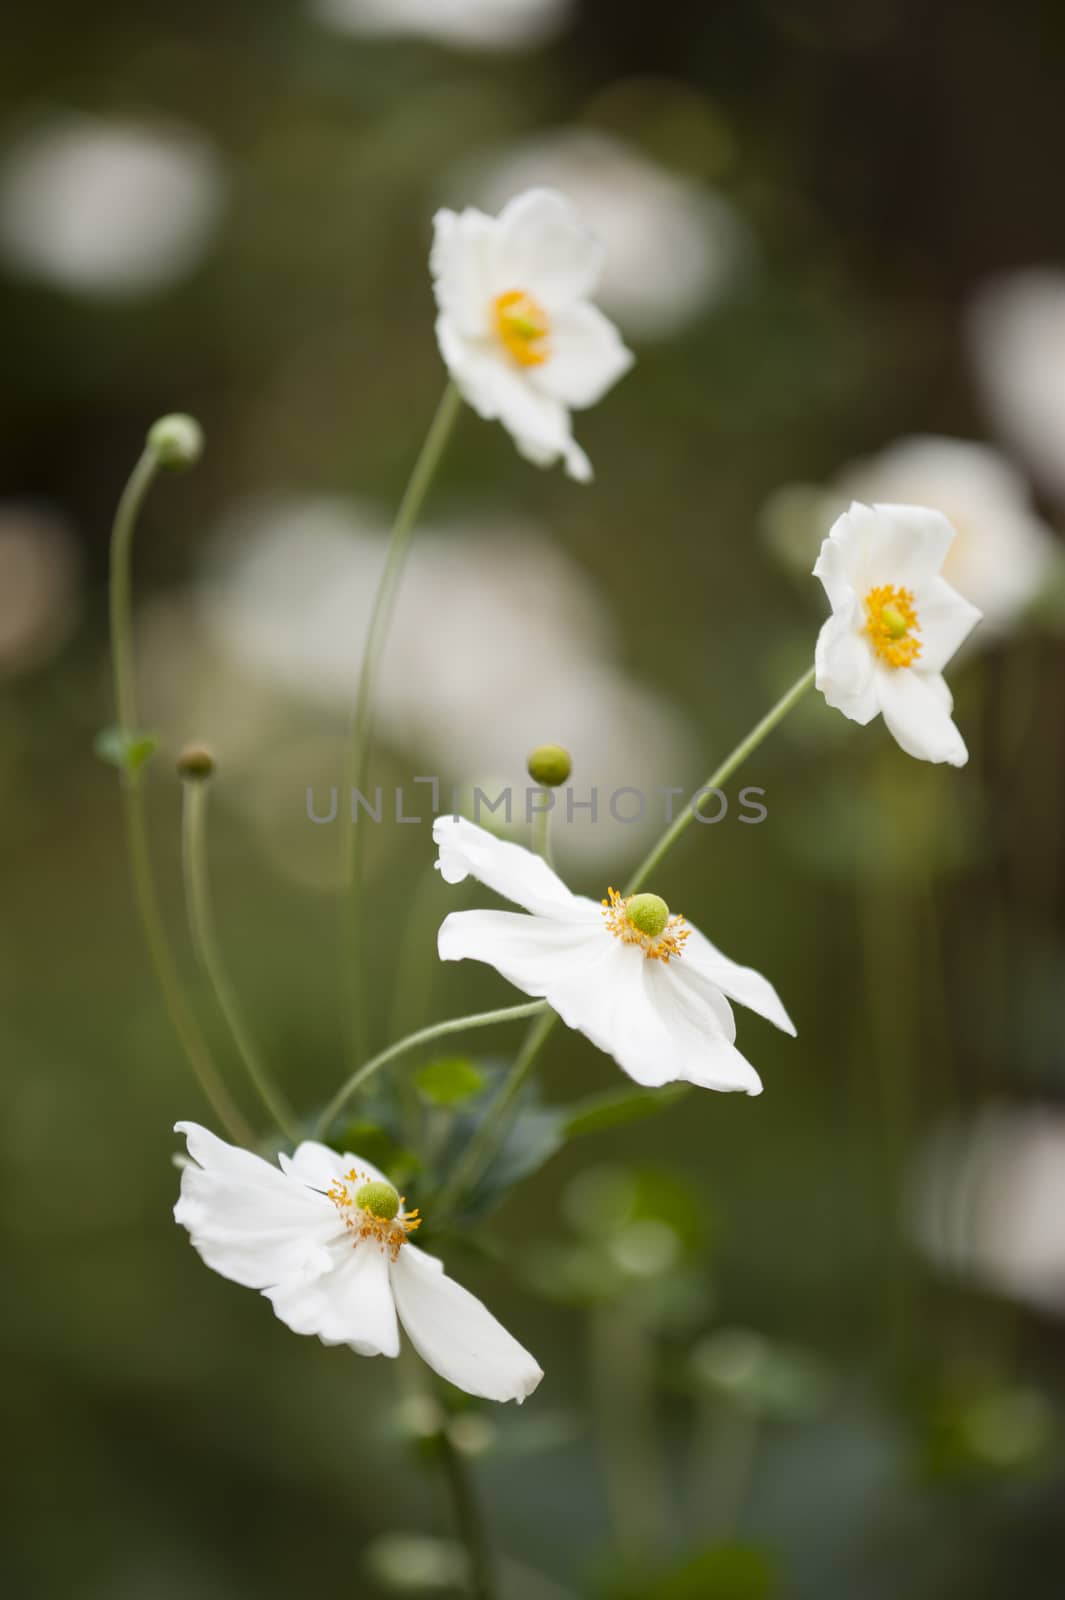 Anemone hupehensis flowers, Chinese anemone or Japanese anemone, thimbleweed, or windflower, flowering herbaceous perennials in the Ranunculaceae family